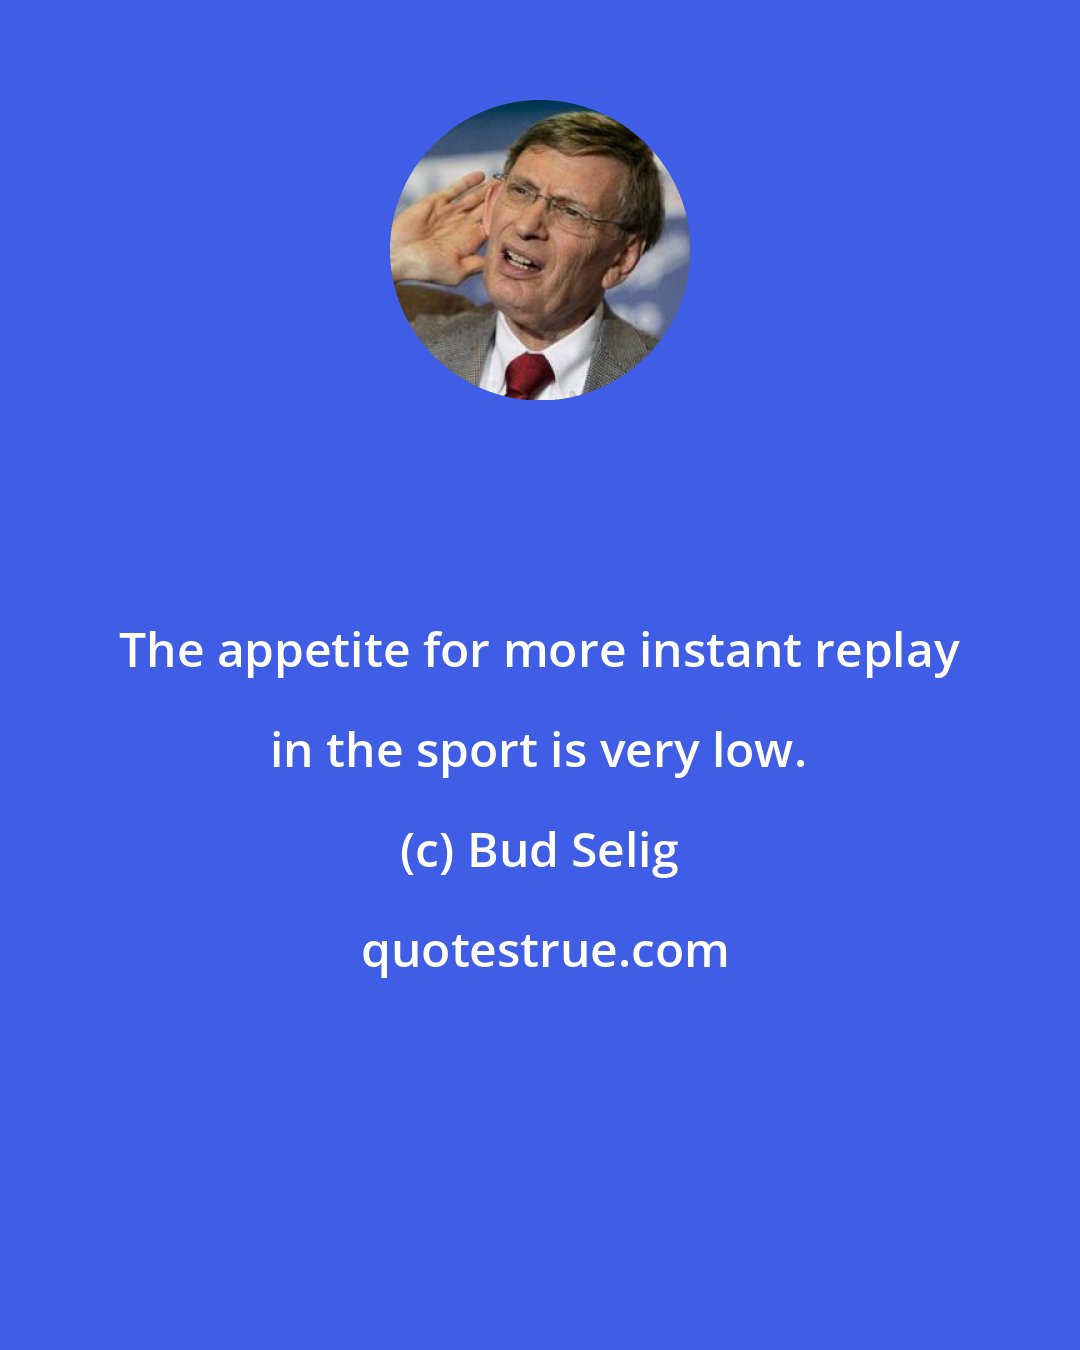 Bud Selig: The appetite for more instant replay in the sport is very low.